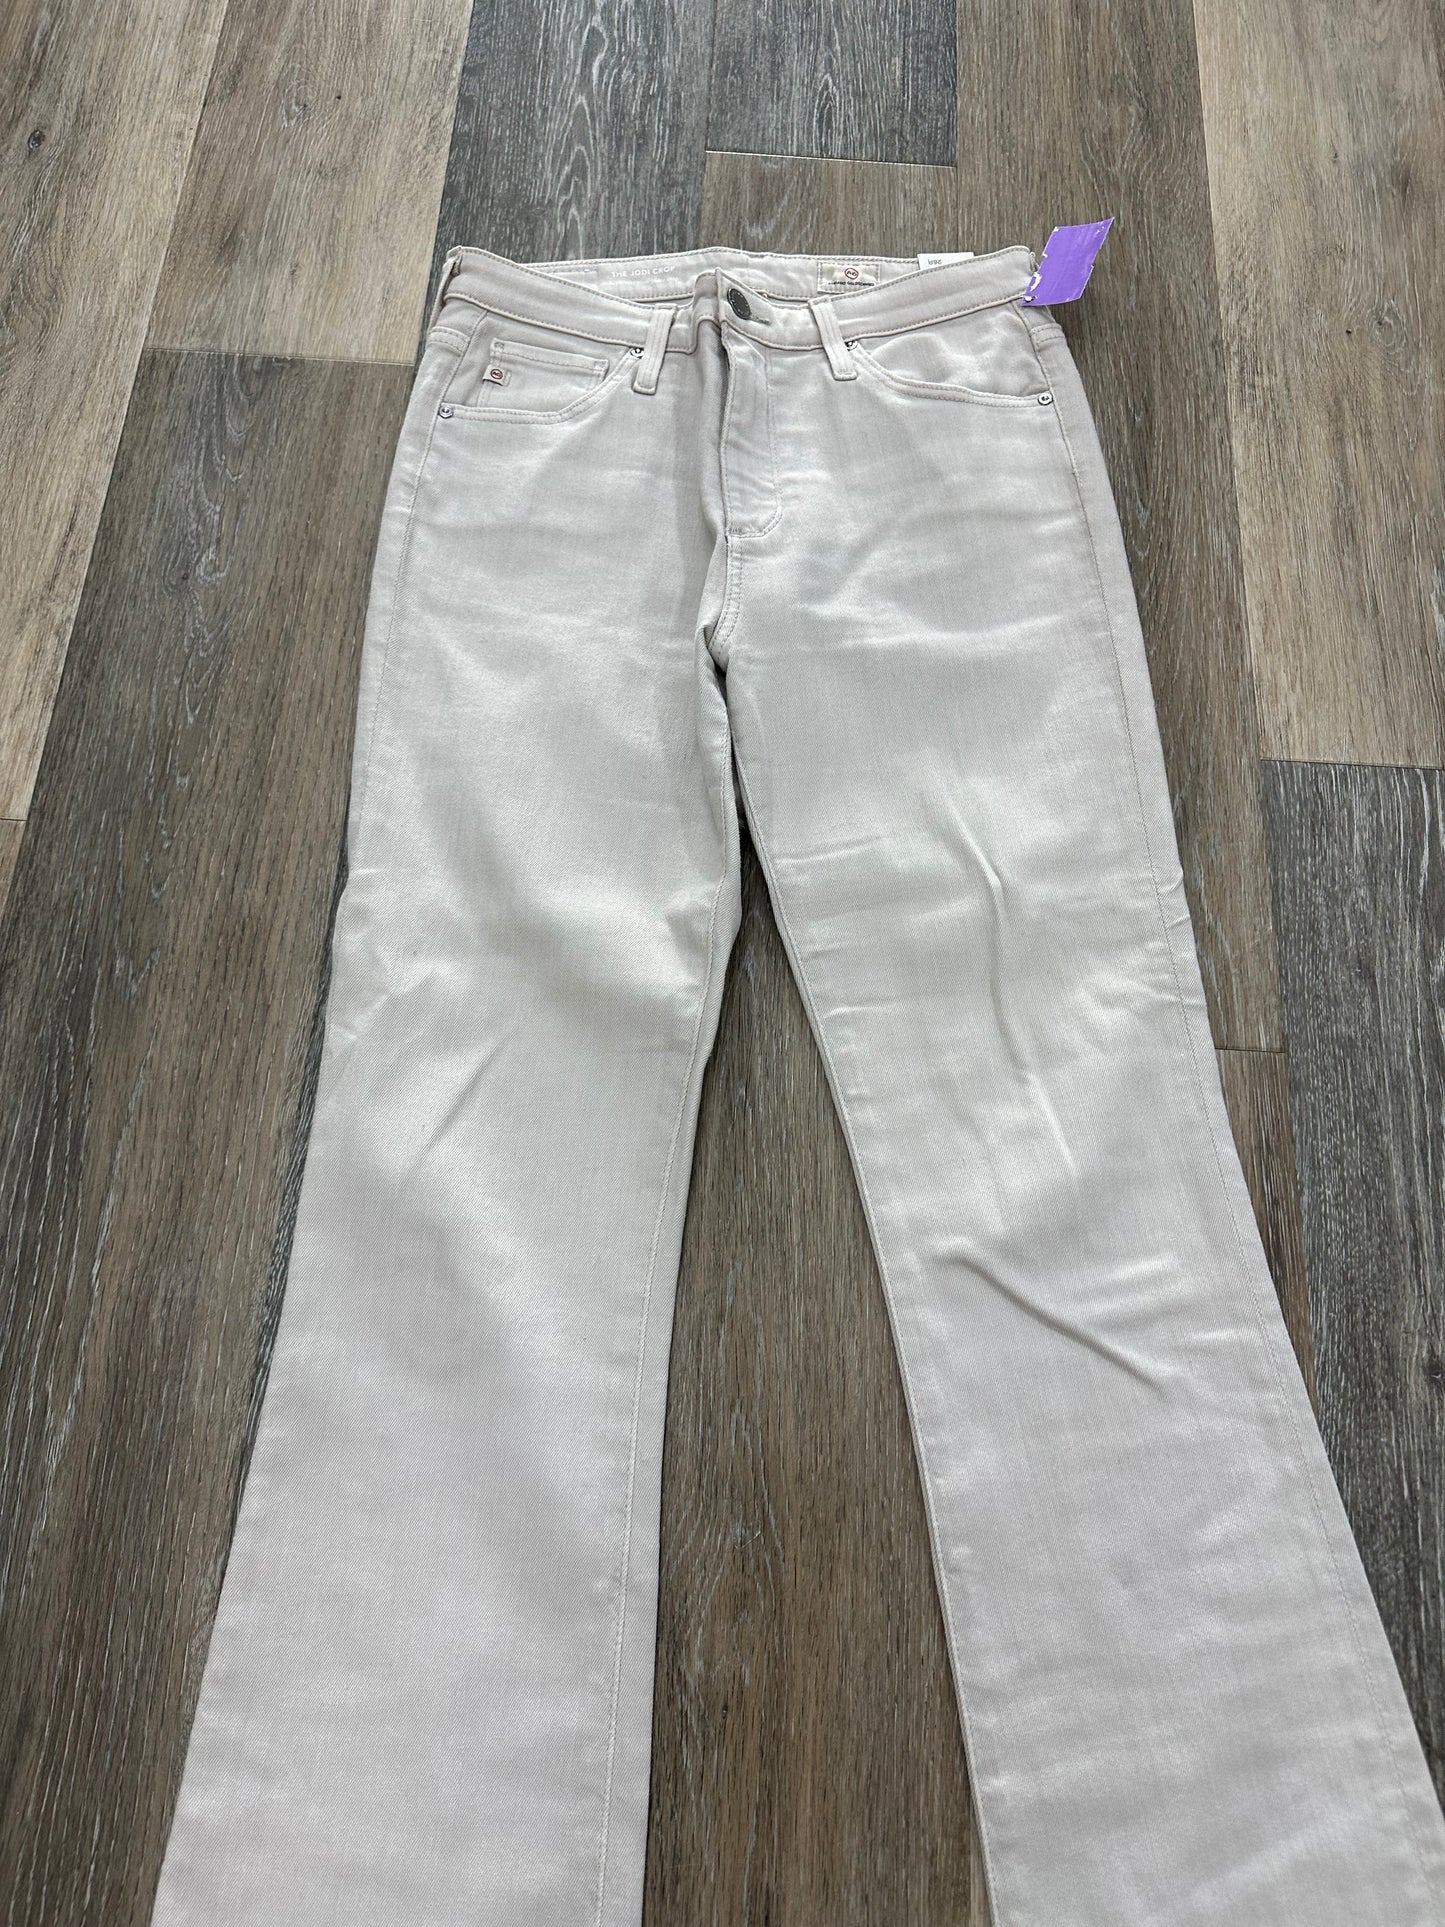 Pants Ankle By Adriano Goldschmied  Size: 2